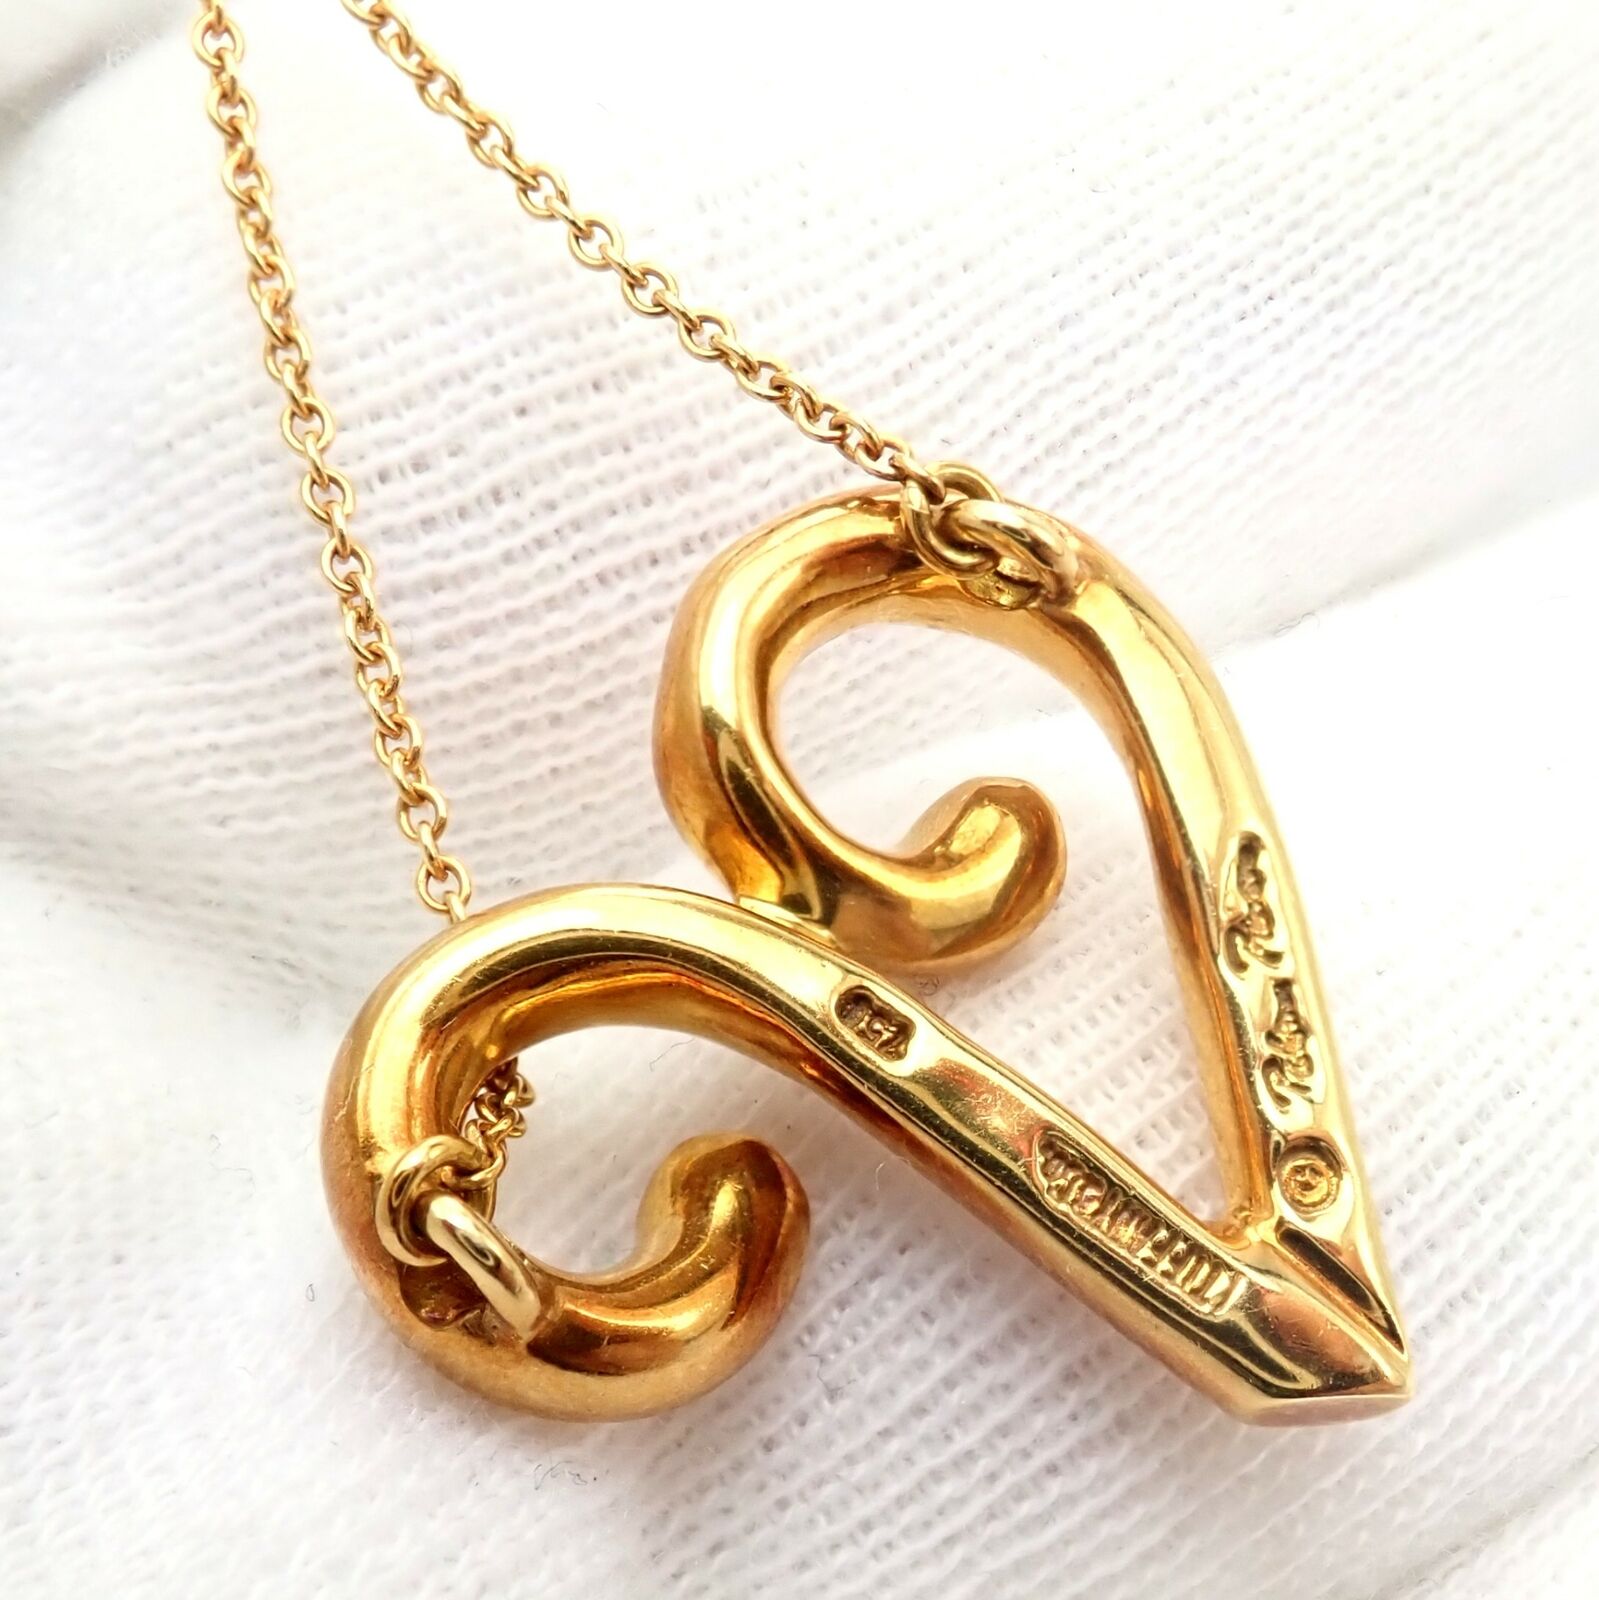 Vintage 'Return to Tiffany & Co.' Heart Tag Pendant Necklace at Susannah  Lovis Jewellers